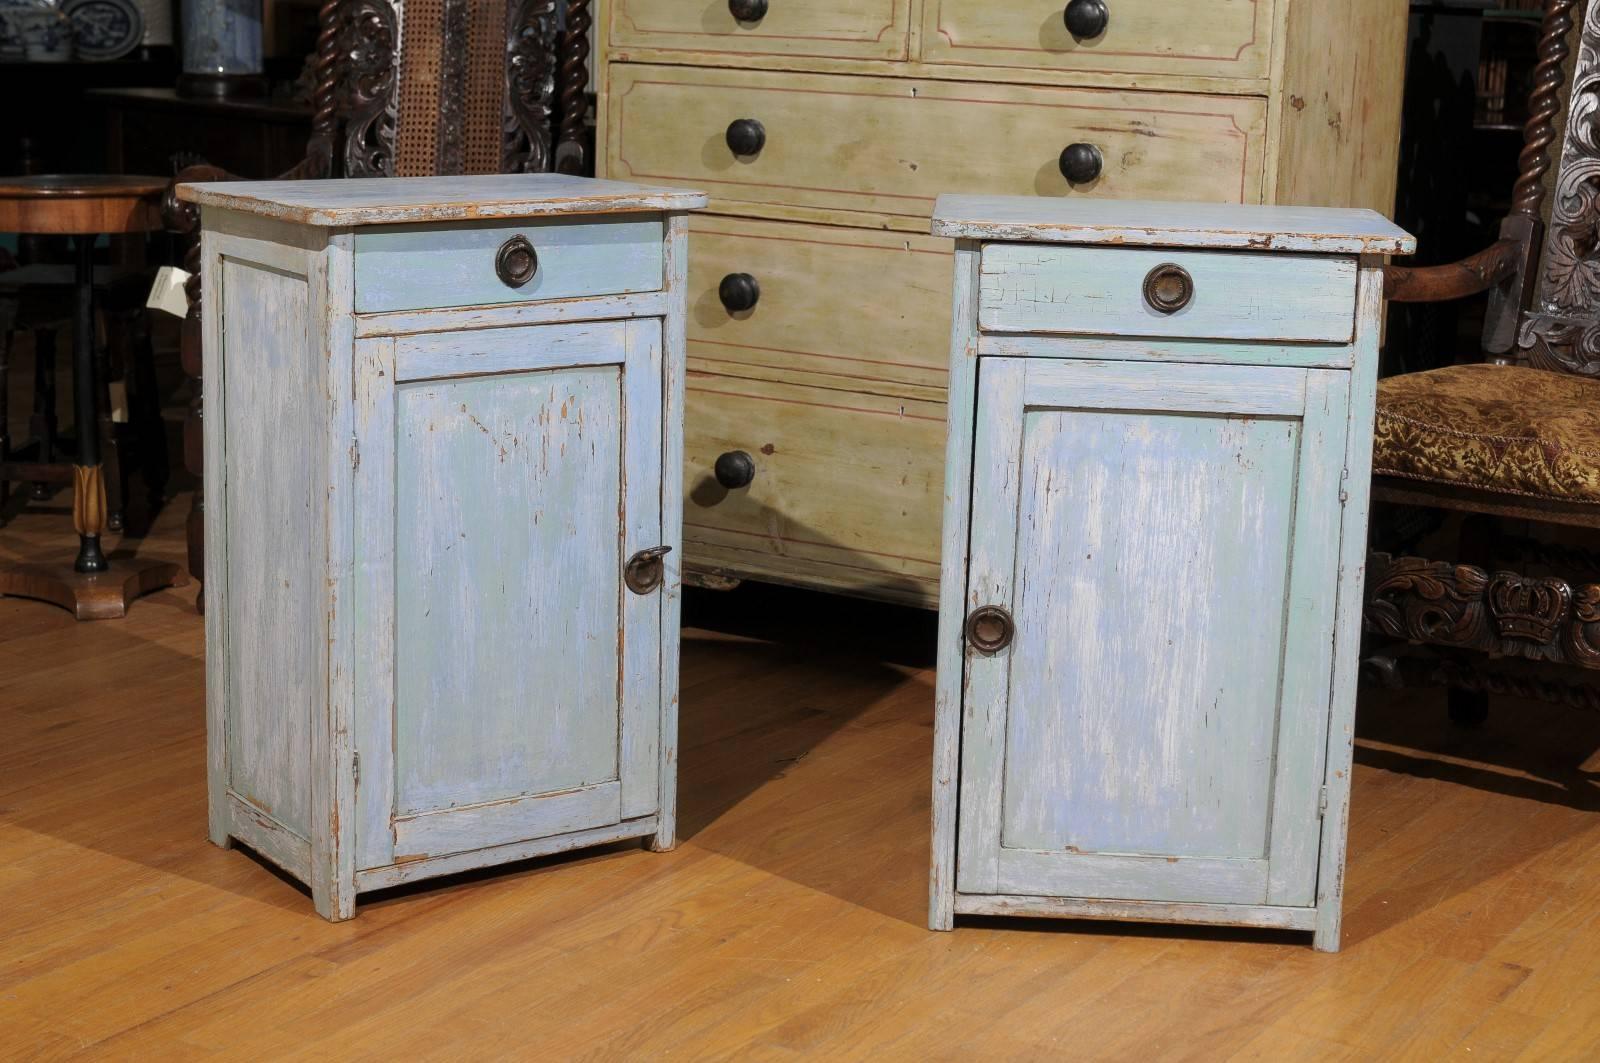 This is a pair of bedside cupboards with original paint. They have a small drawer at the top and a door that opens up to more storage. There is a shelf in the middle of the cupboard. These would work as beside tables, beside chairs for extra